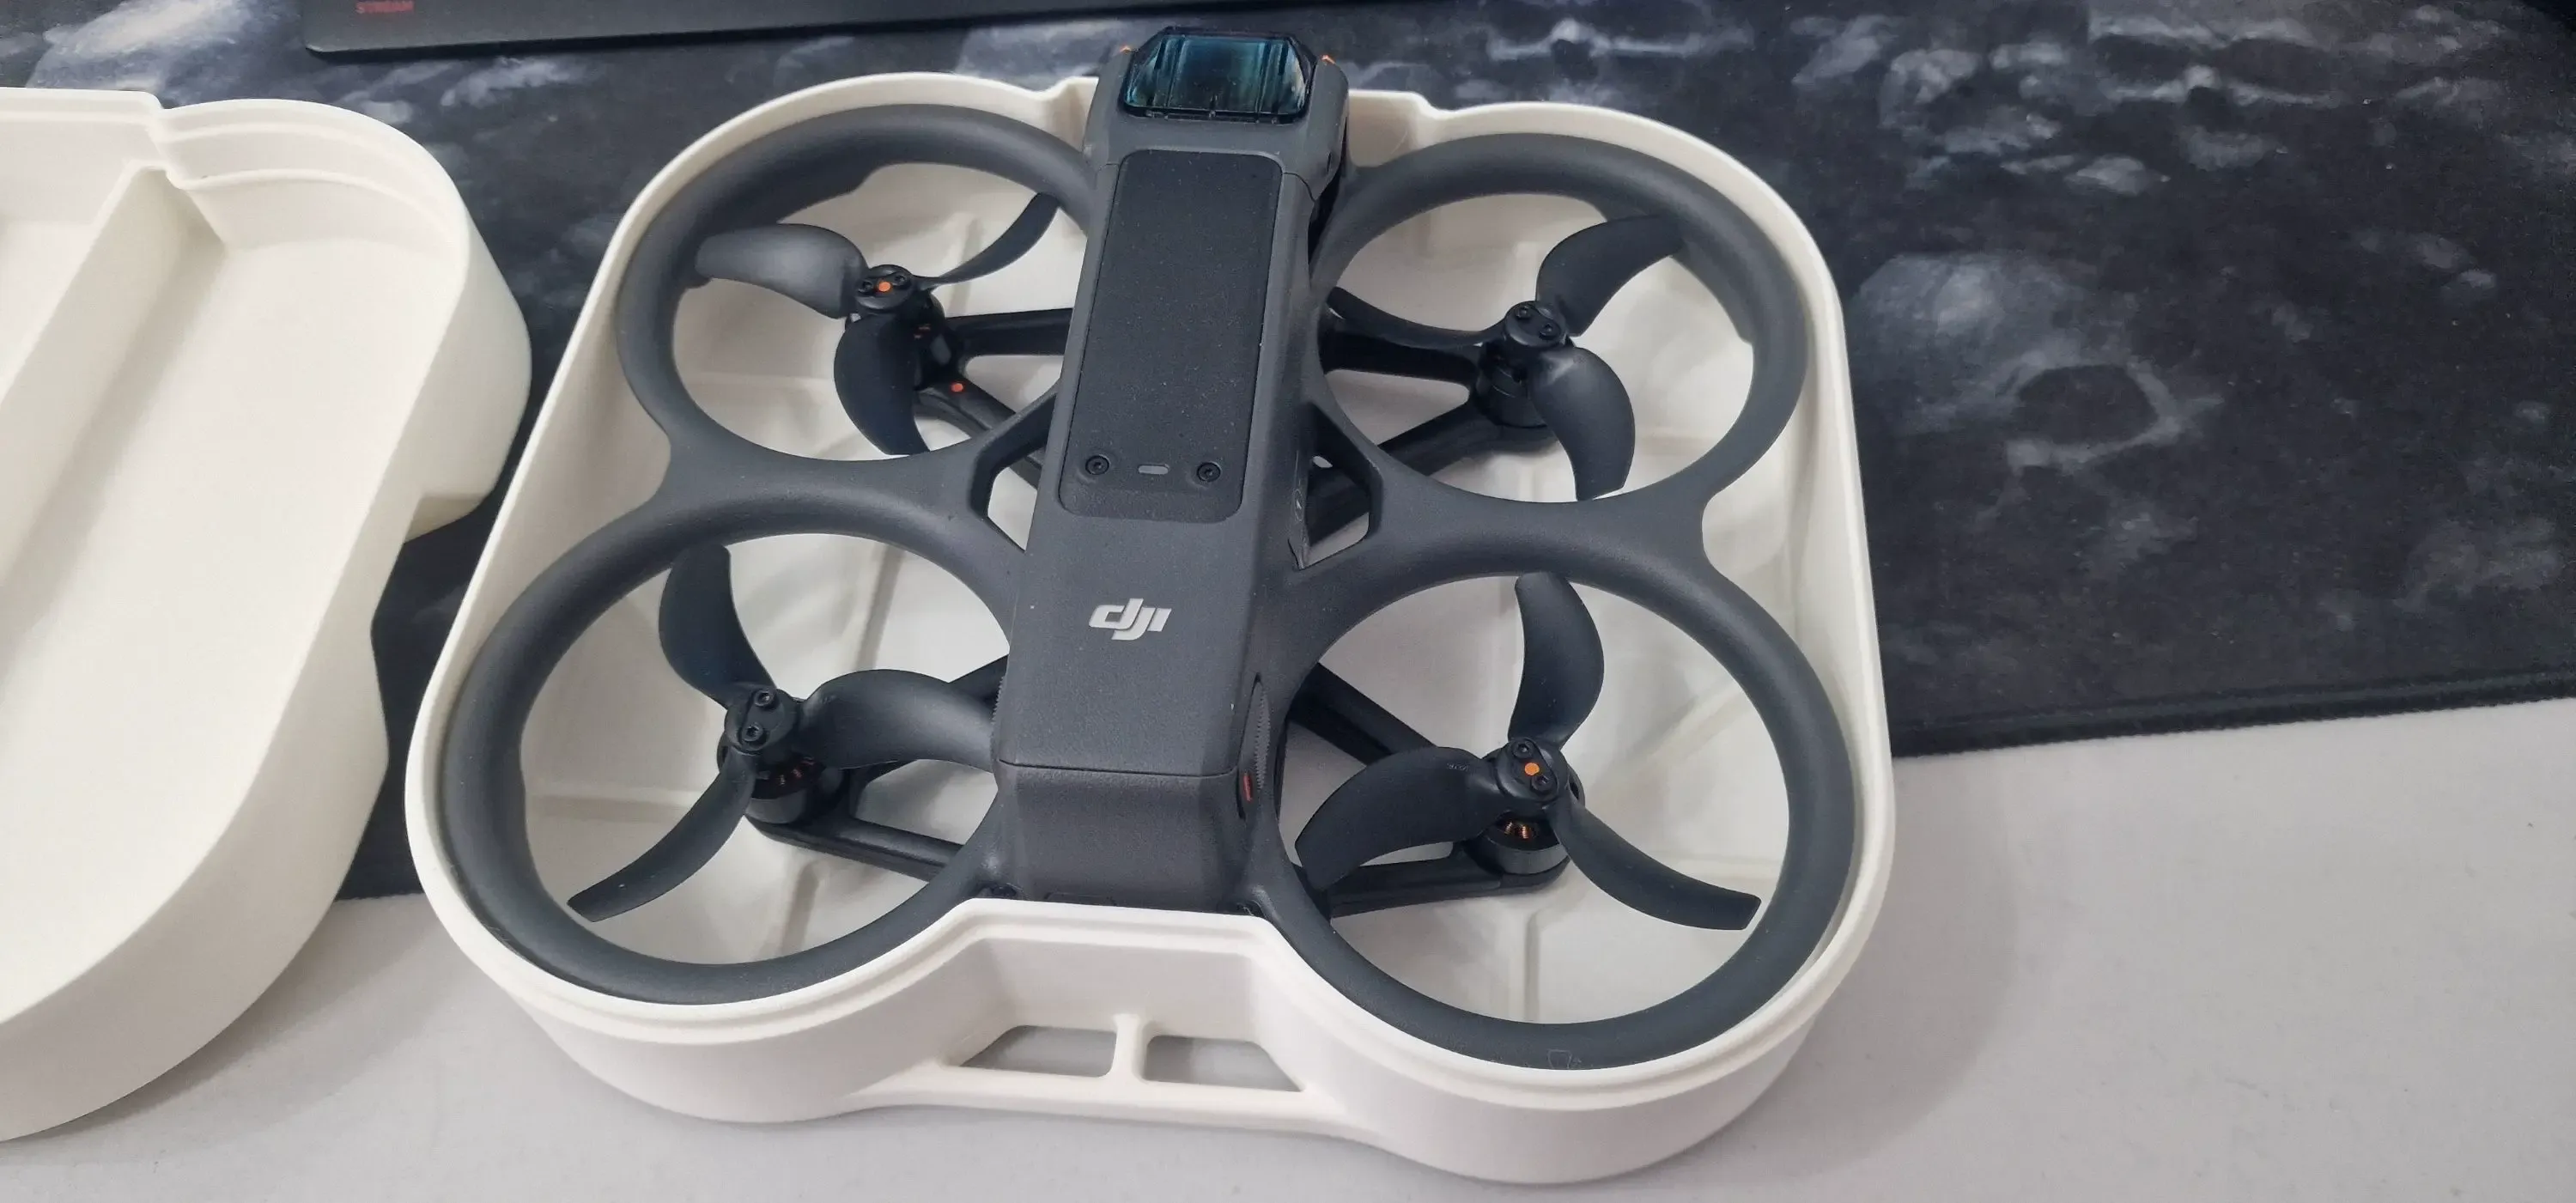 DJI AVATA 2 Printed Hard Case with space for tools / rotors!